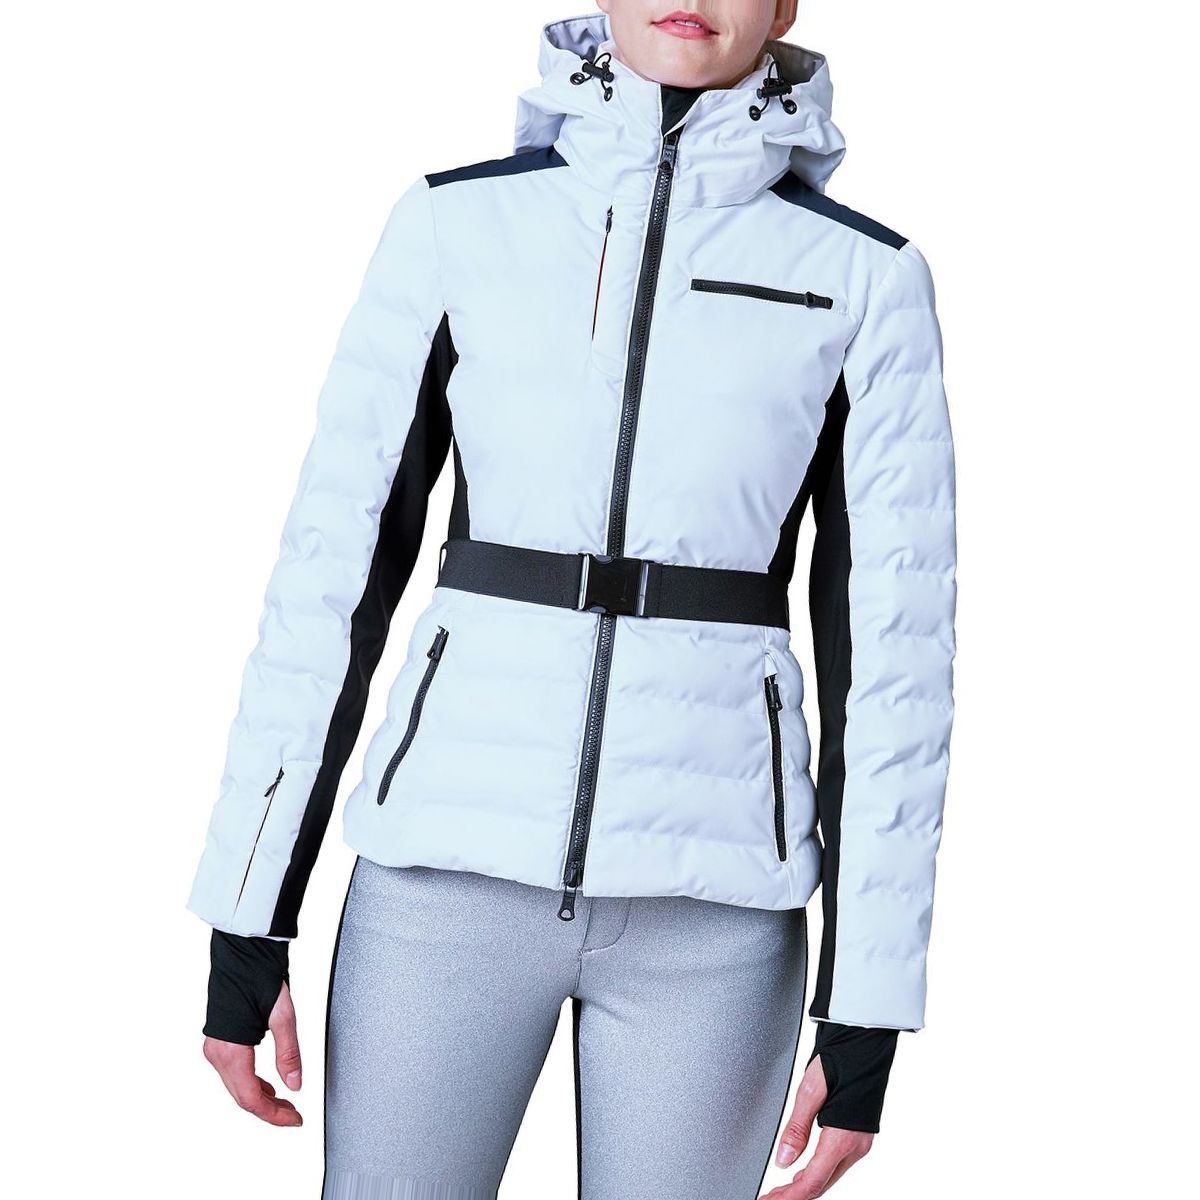 The 16 Best Ski Clothing for Ladies in 2019